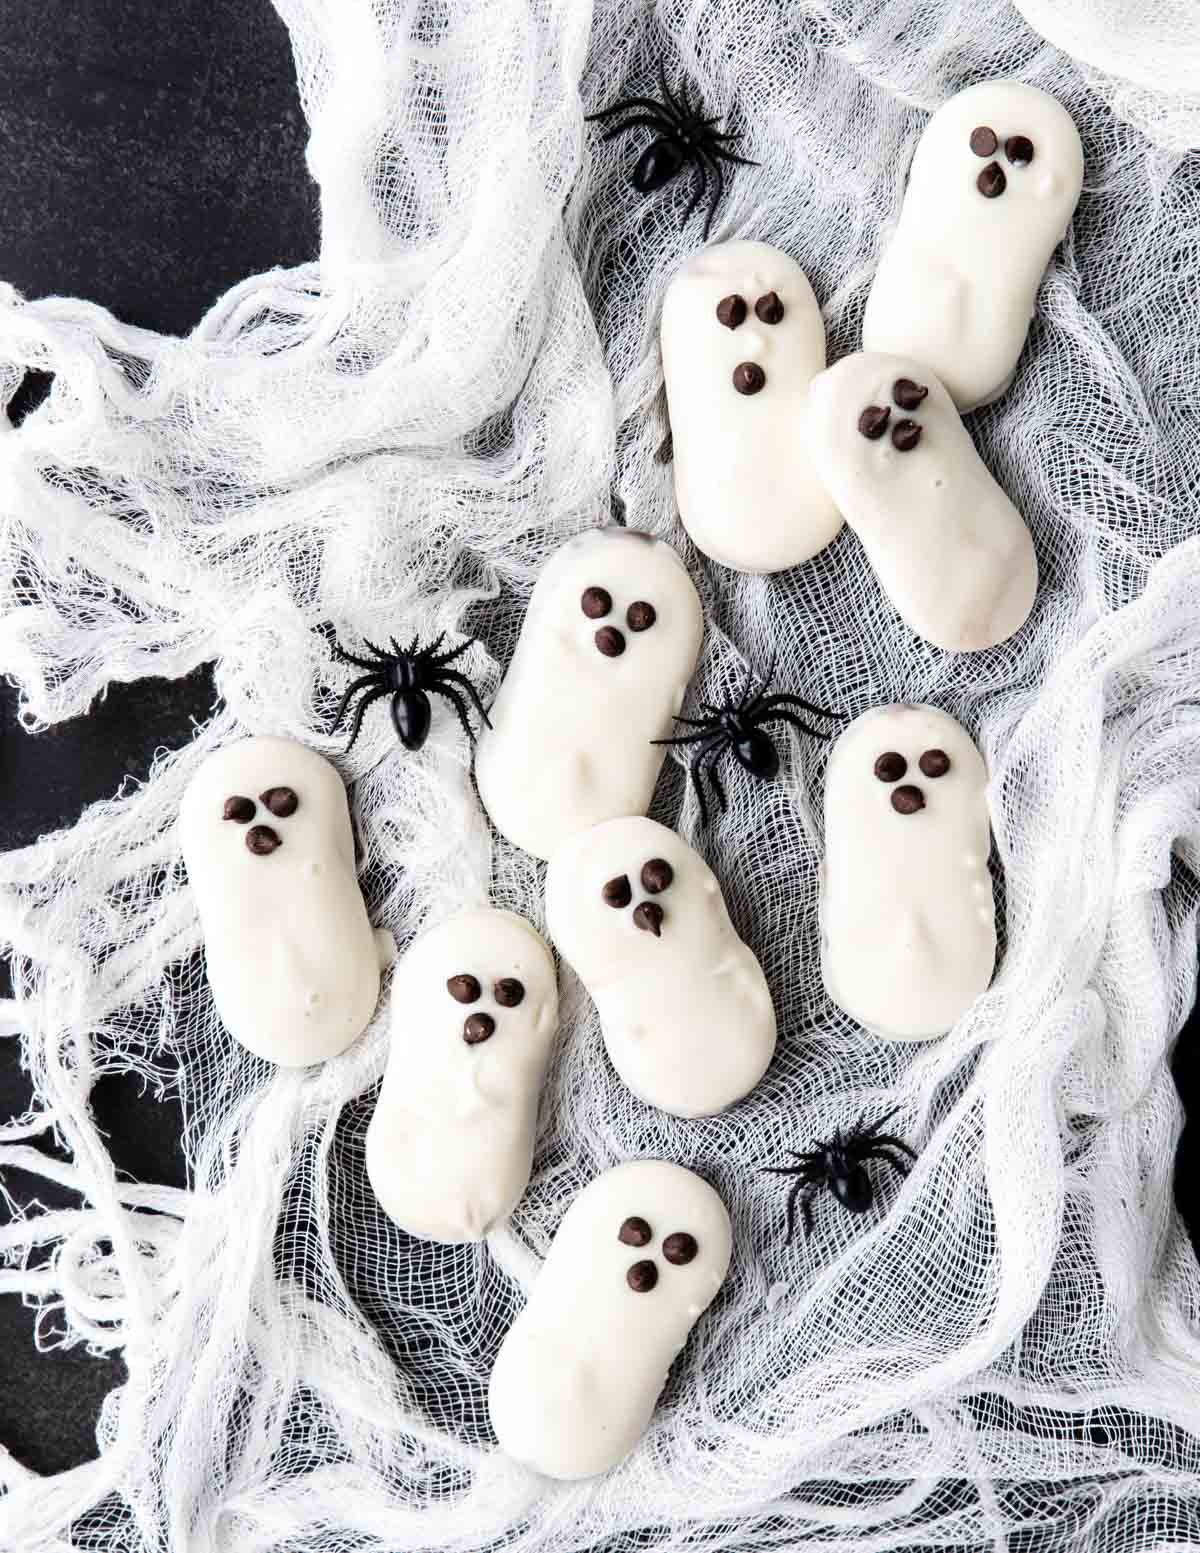 White Chocolate Ghost Cookies with mini chocolate chip eyes and mouth